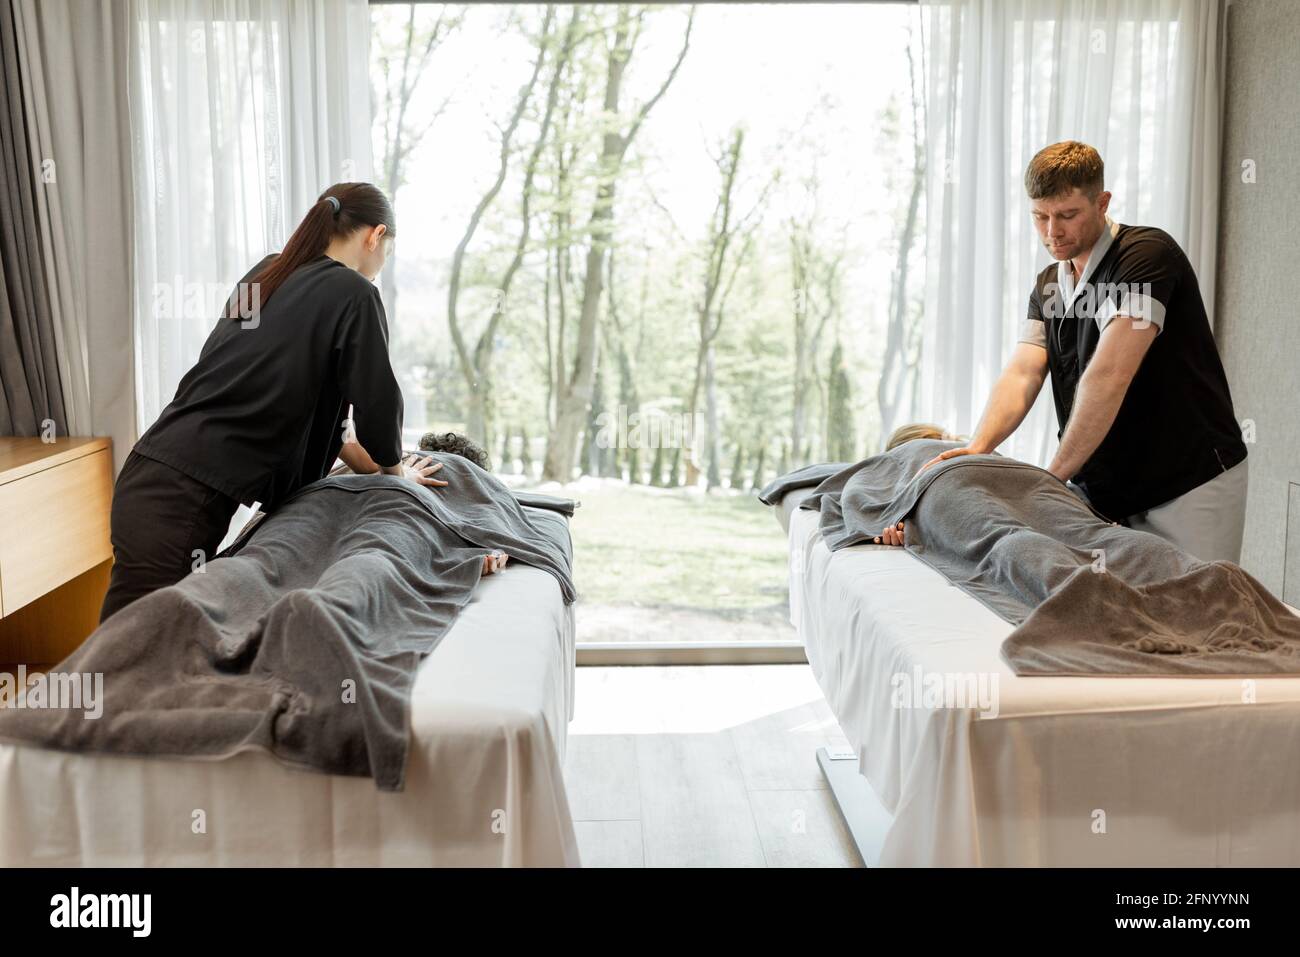 Two masseurs doing a deep back massage to guests with pampering technique. Wellness and leisure time for health care together with forest view in window. Stock Photo